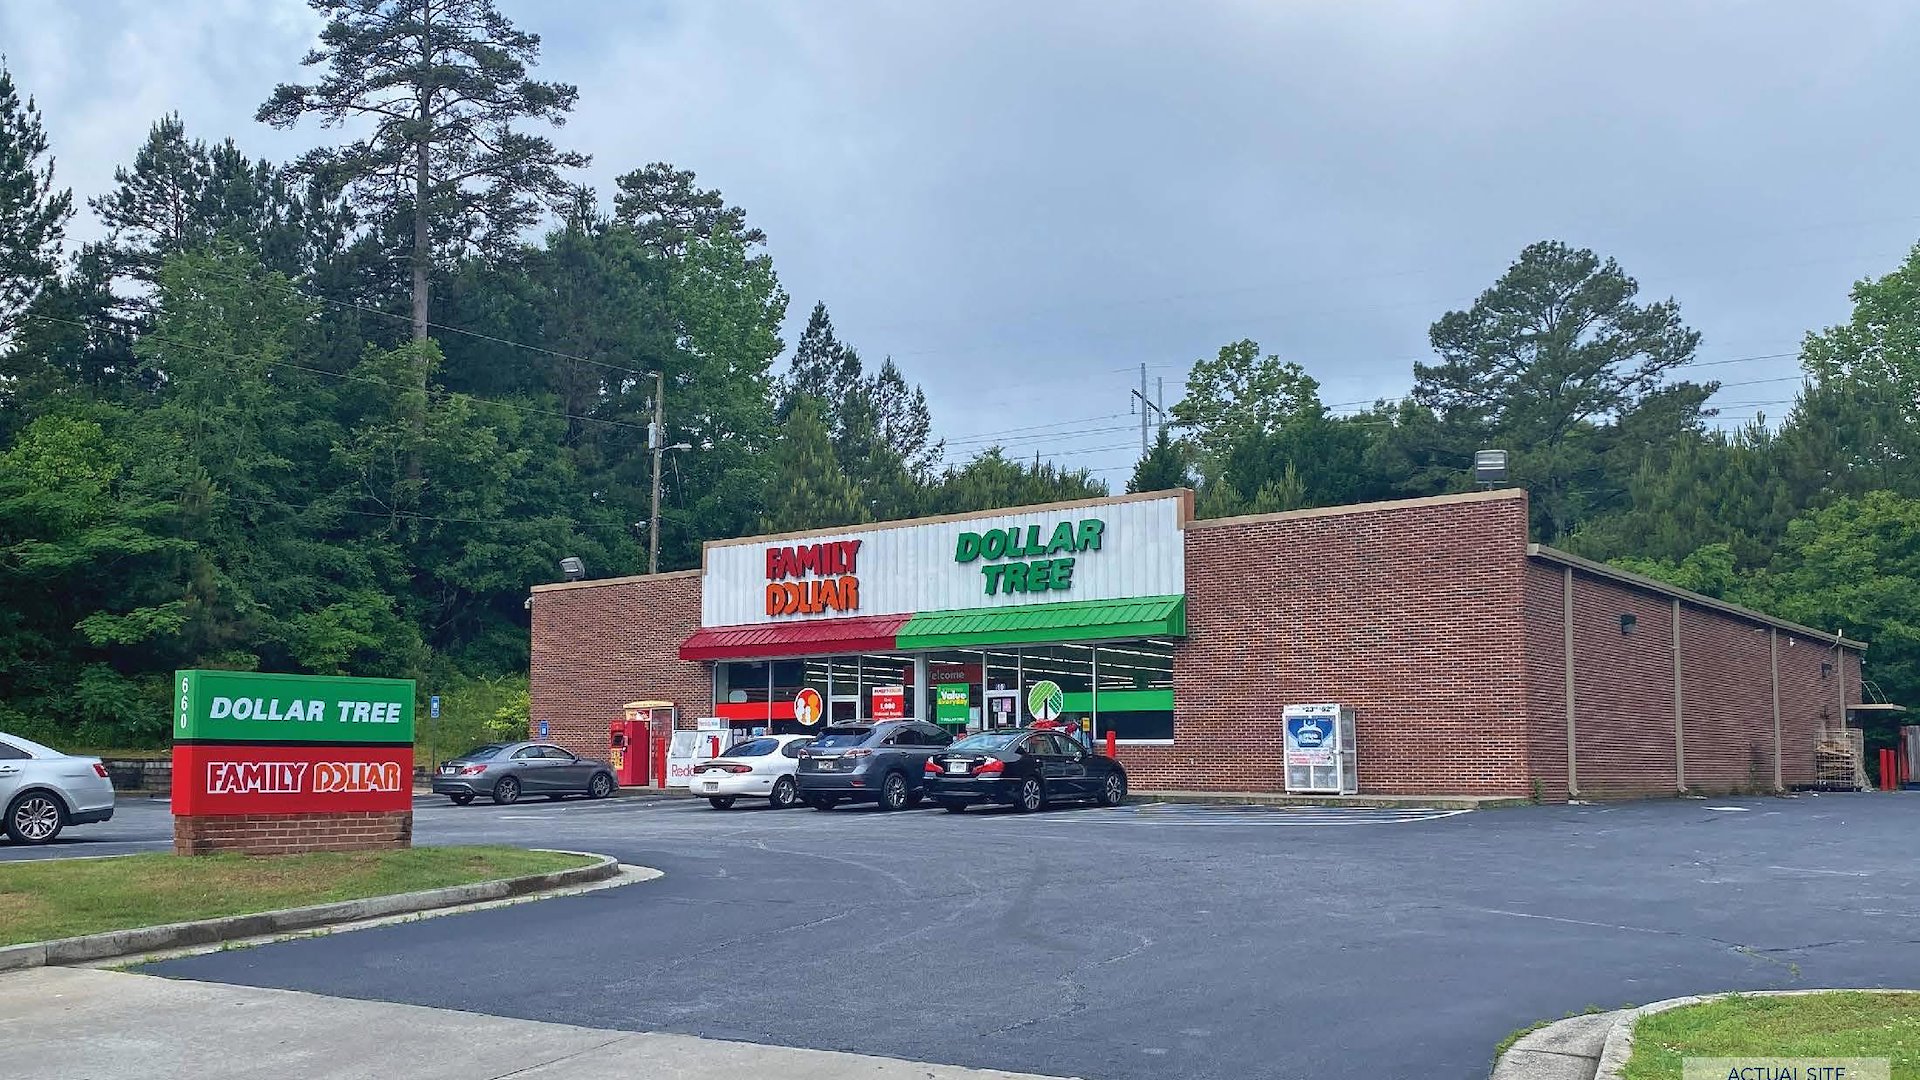 Dollar Tree May Sell Family Dollar After Years Together What's Next for Shoppers----